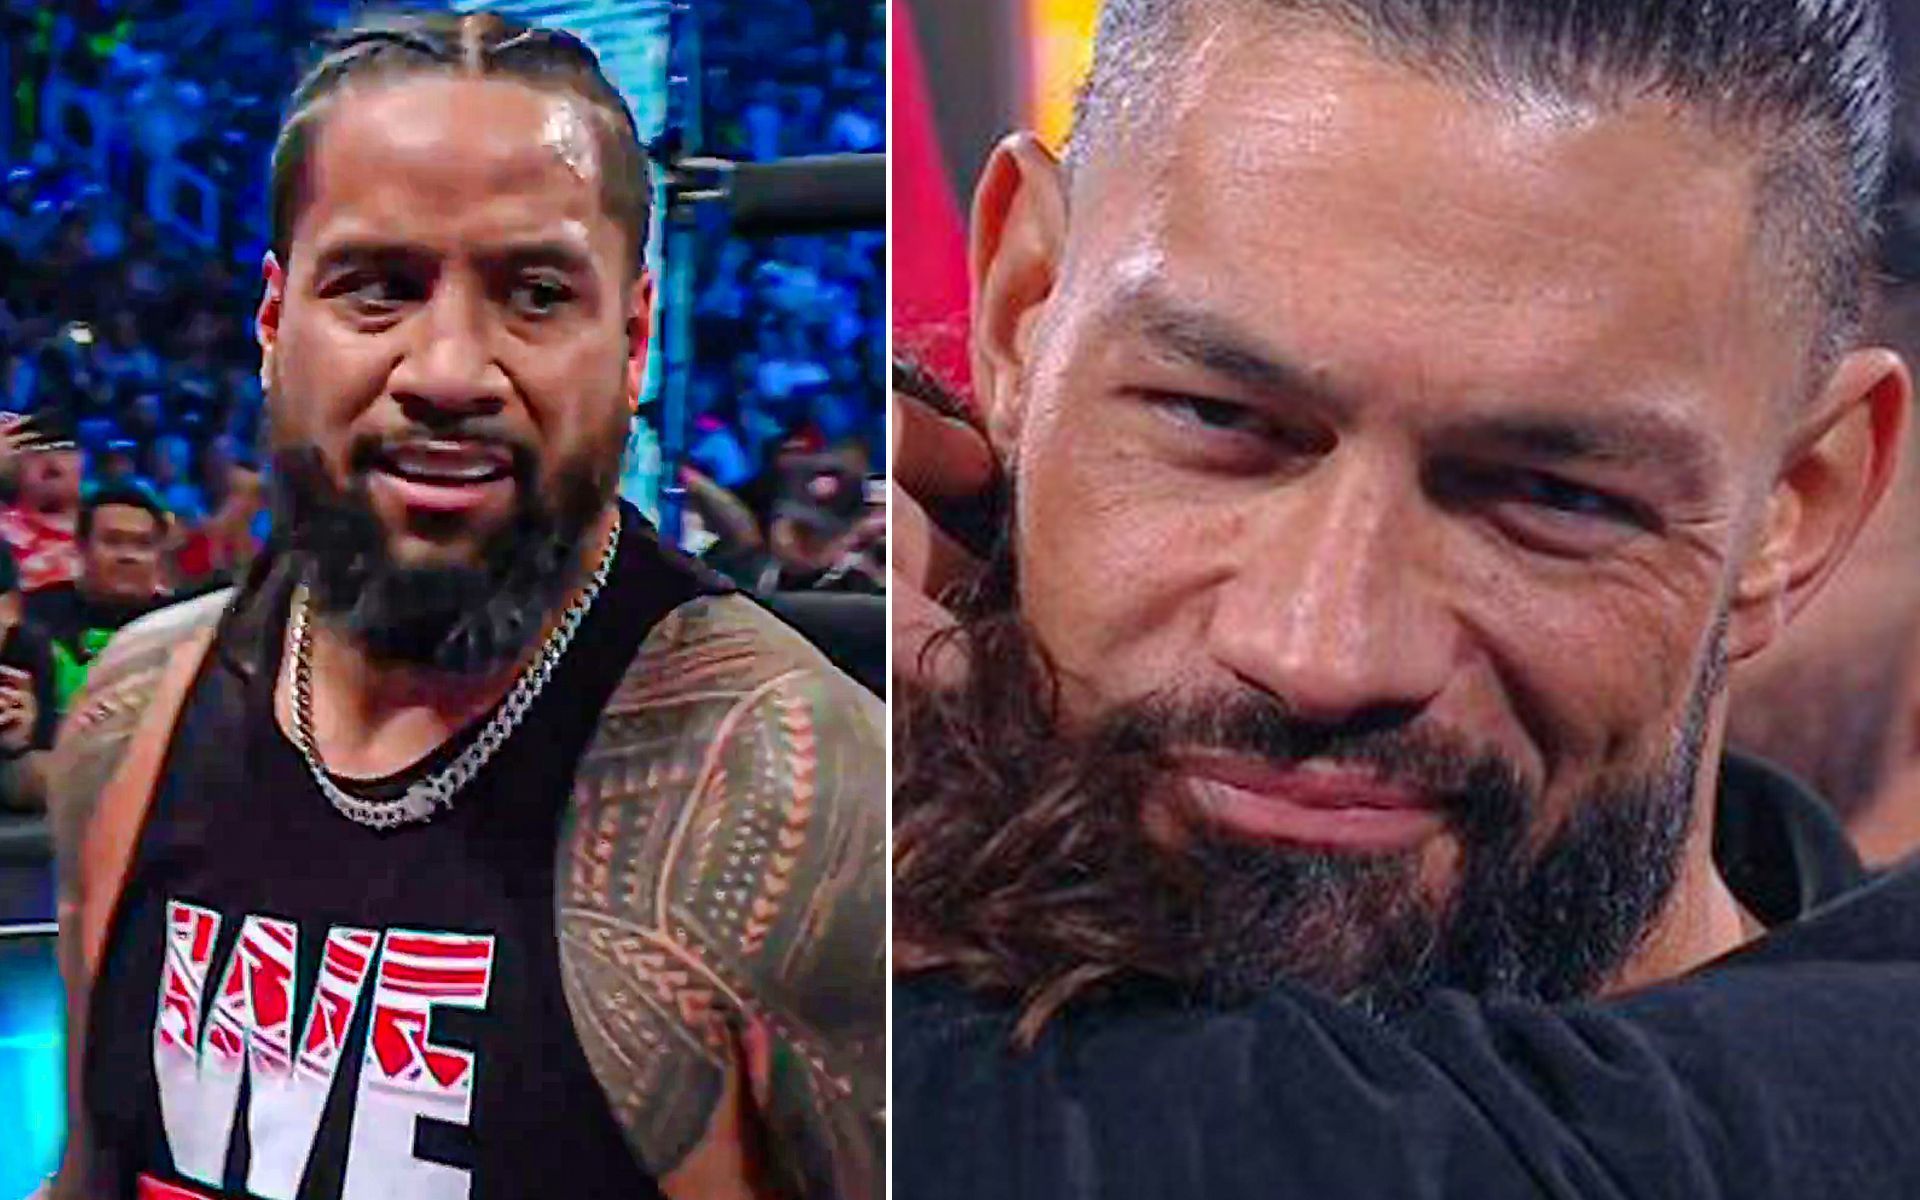 Will Jimmy Uso able to regain the confidence of the Bloodline?